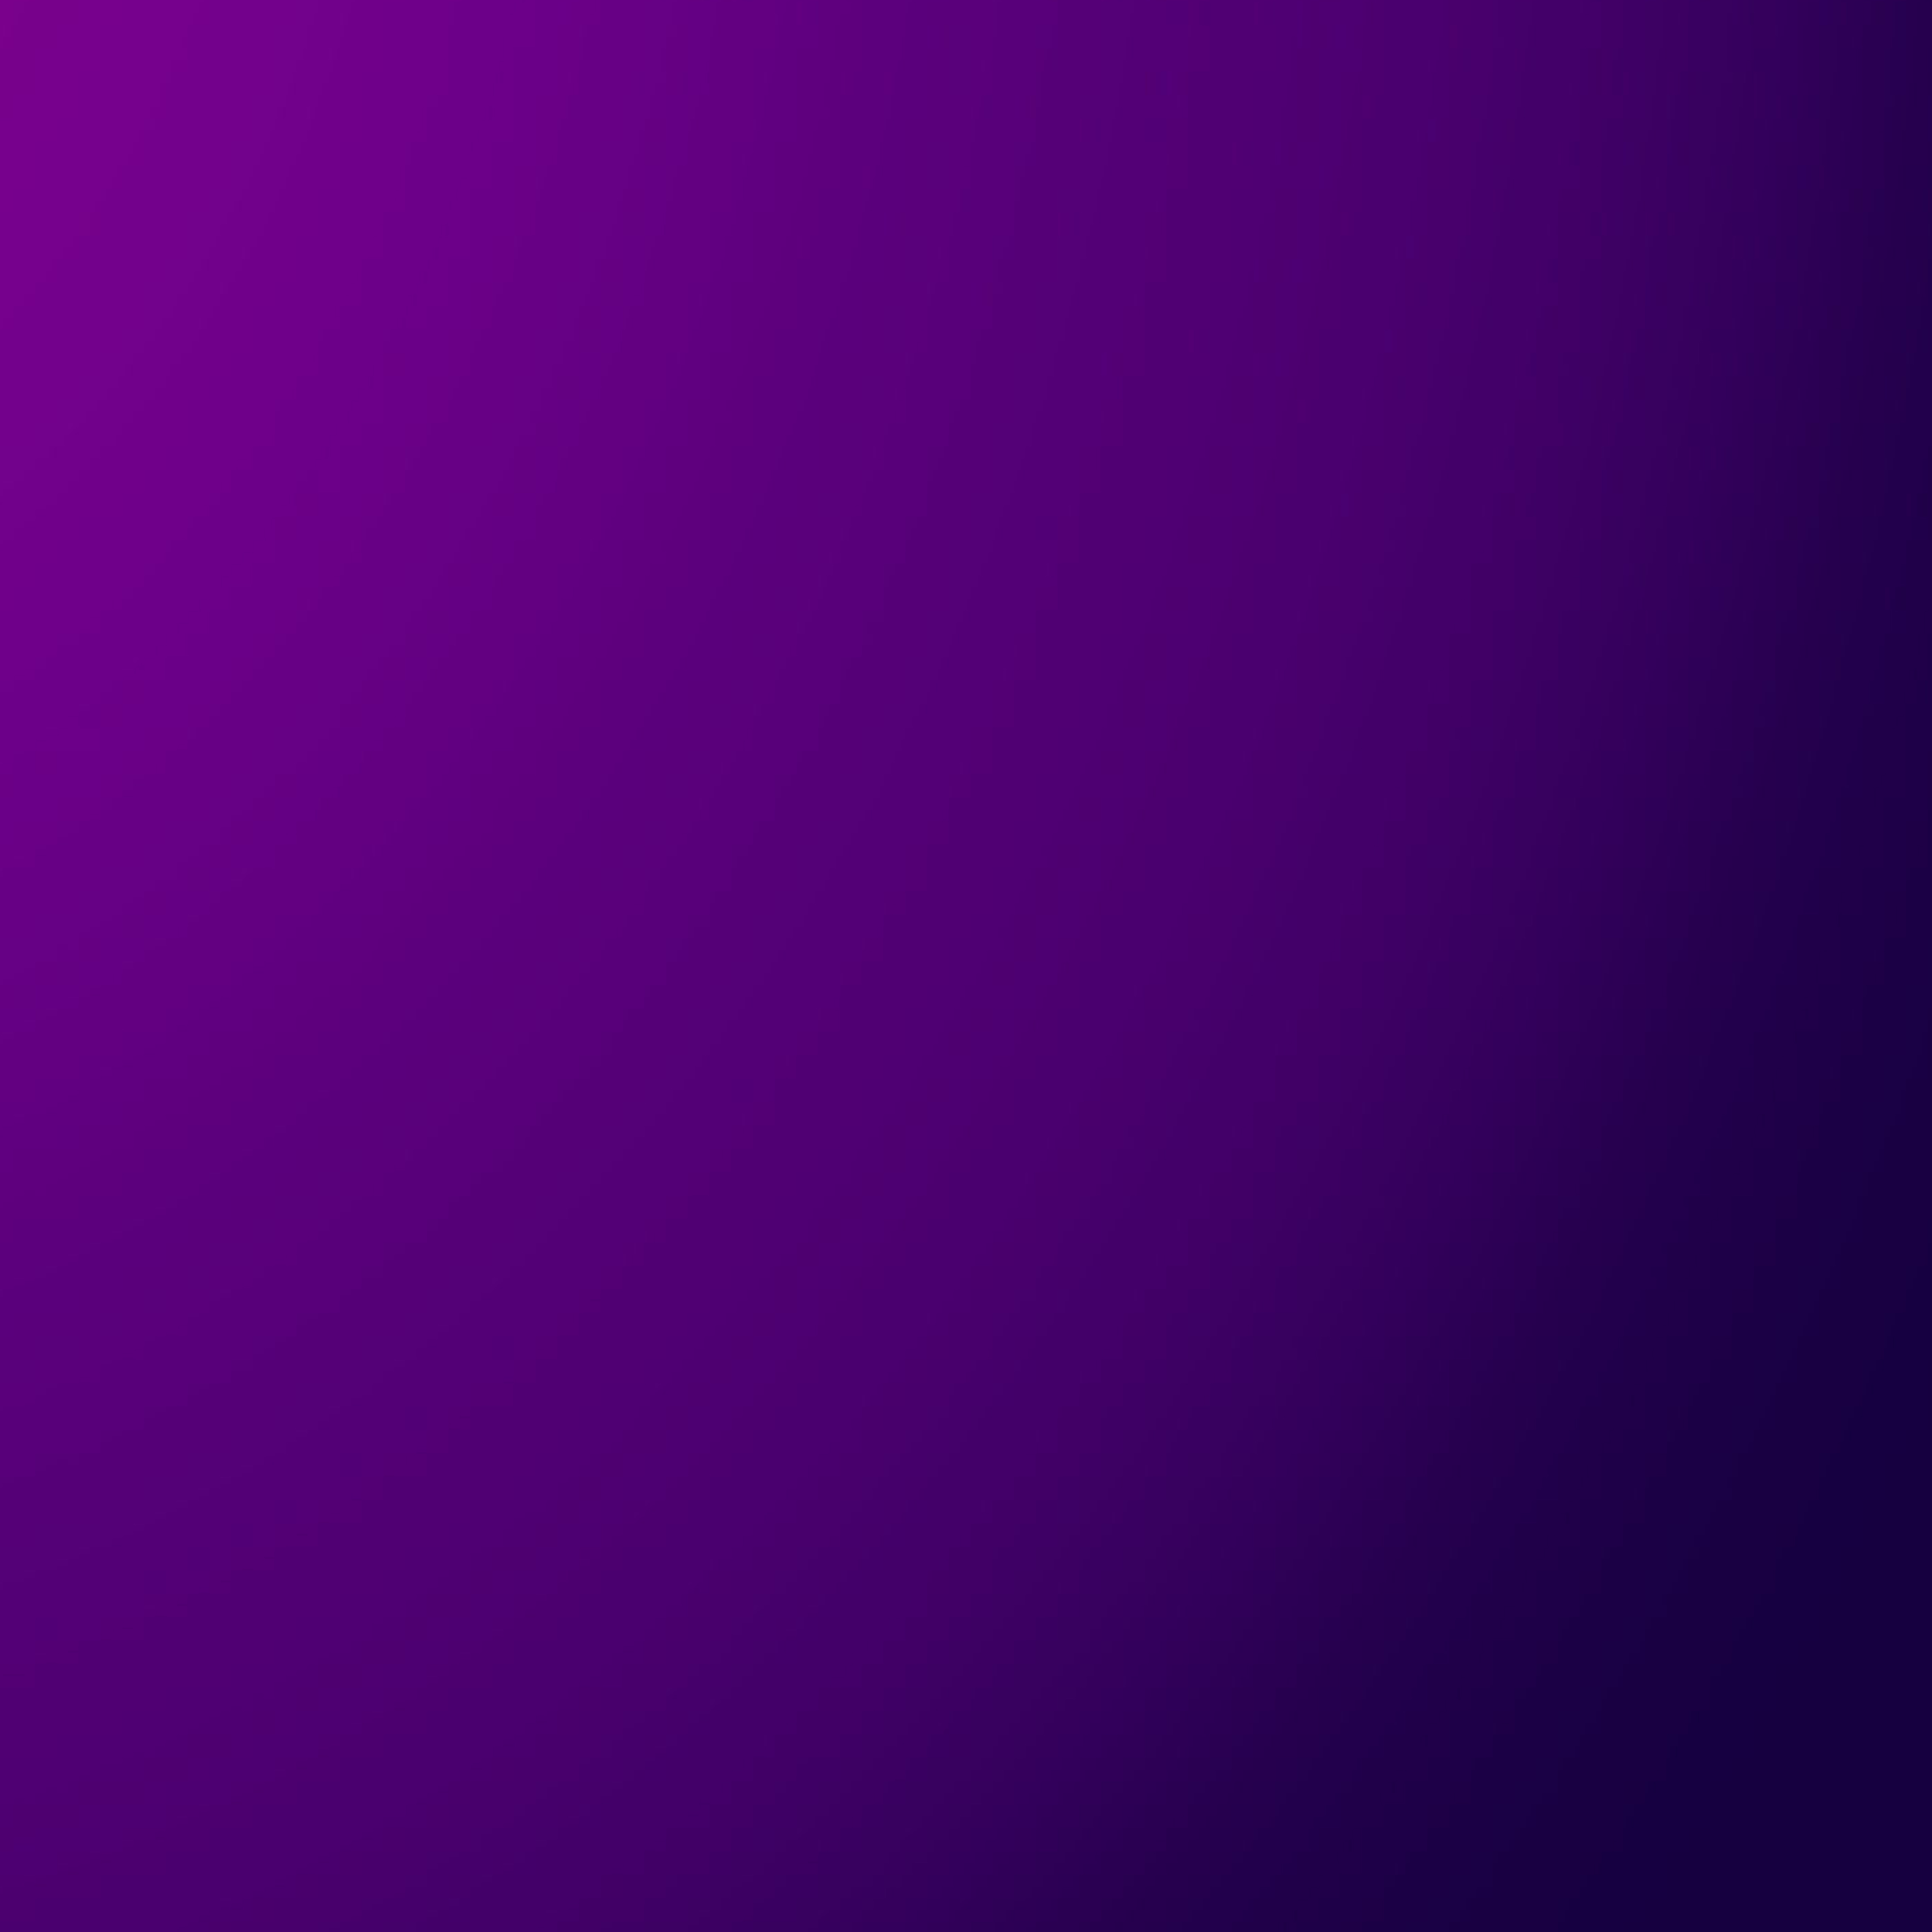 Purple Bg Stock Photos, Images and Backgrounds for Free Download